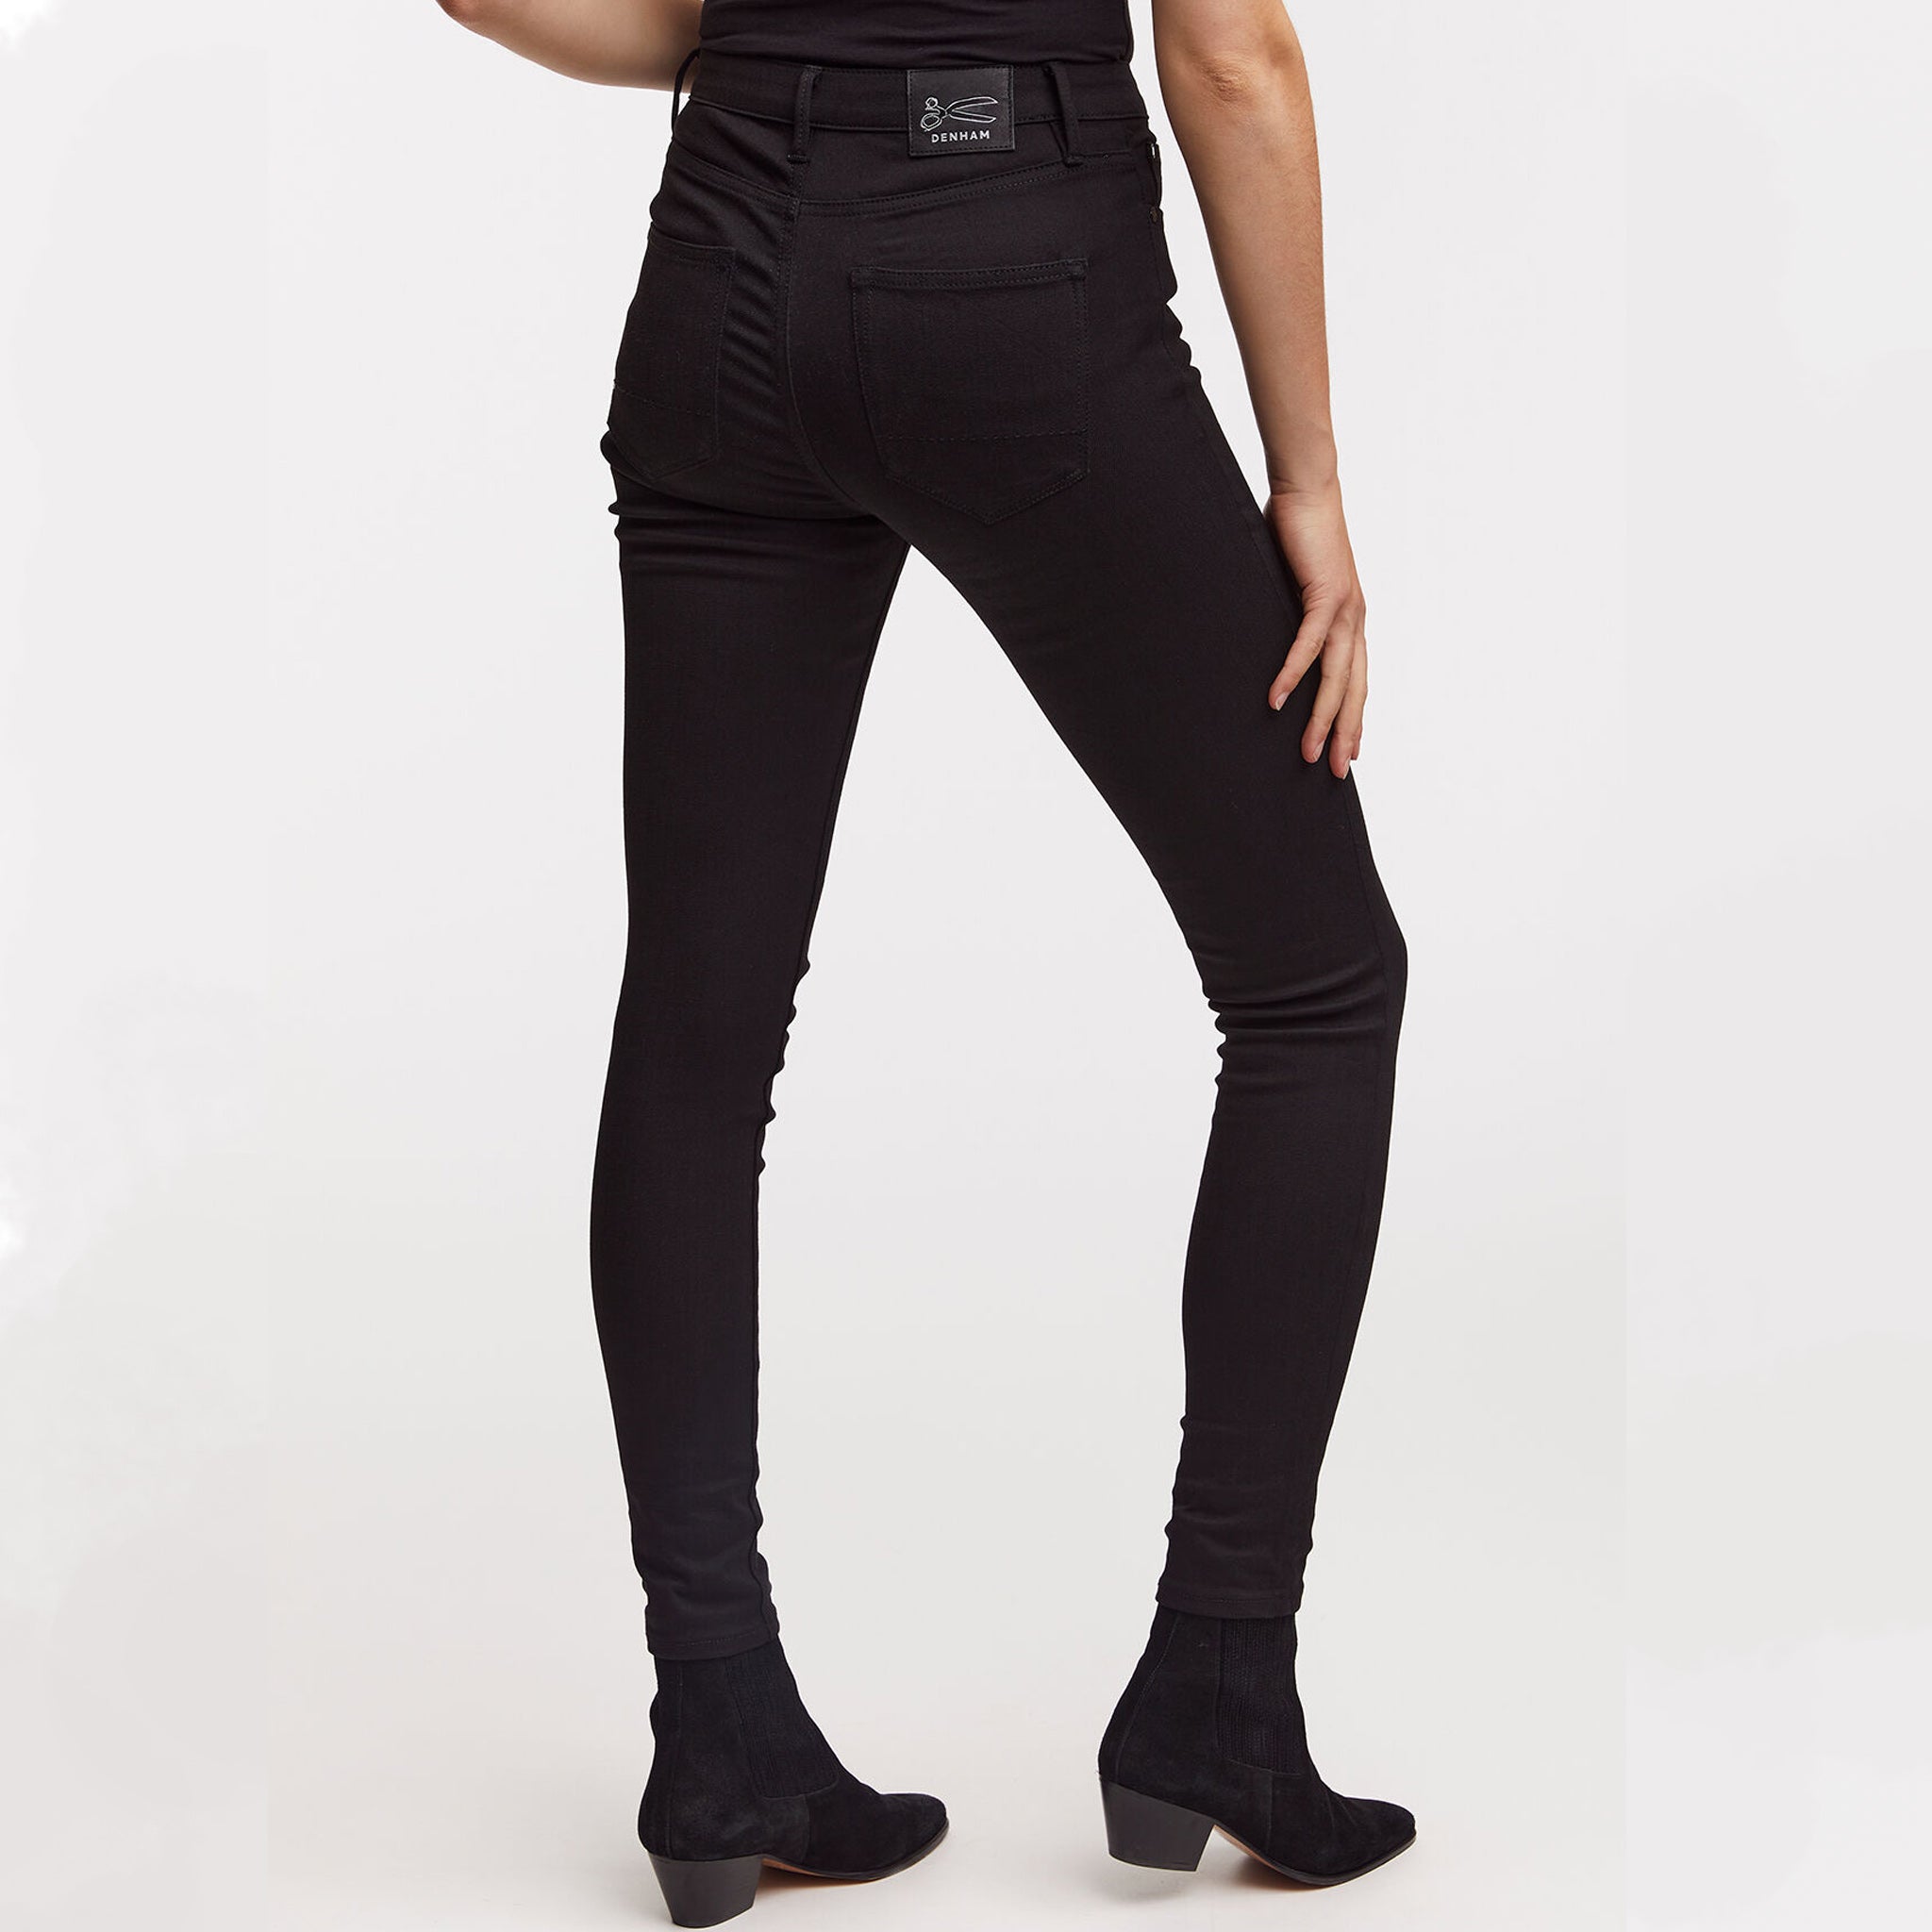 The back view of a woman wearing Denham's NEEDLE Skinny - True Black jeans.